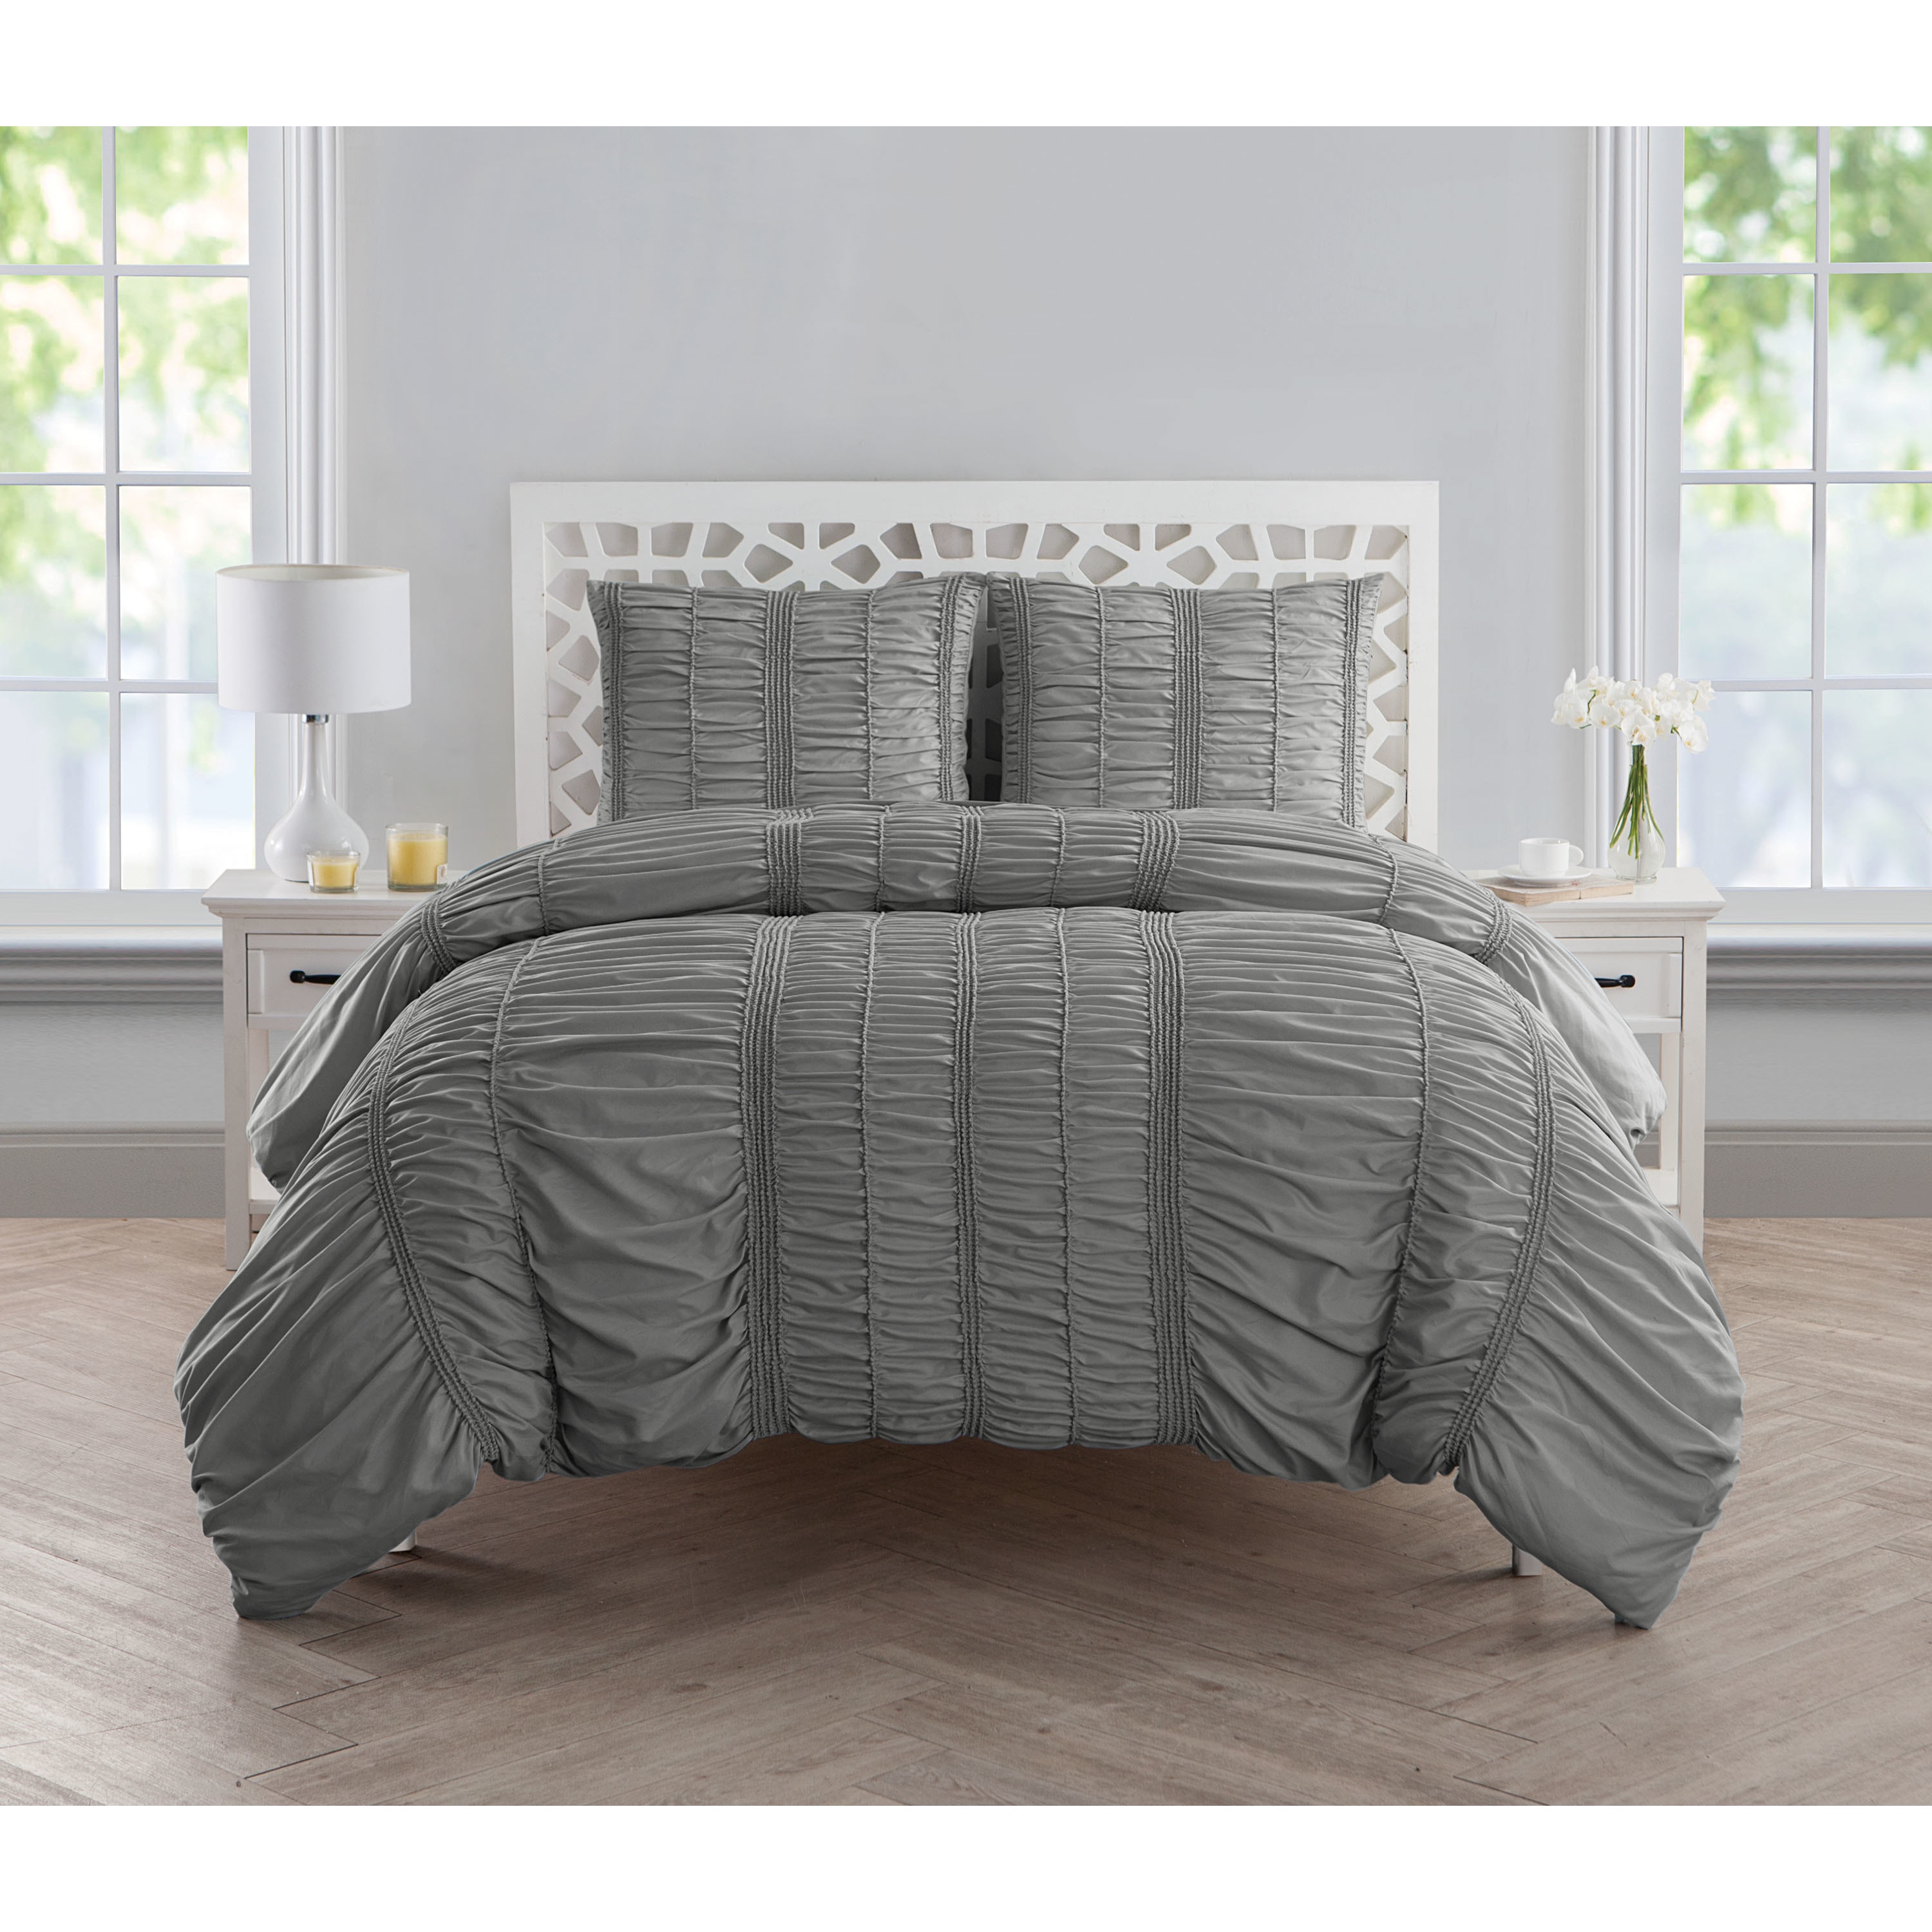 Shop Vcny Home Holly Ruched Duvet Cover Set Ships To Canada